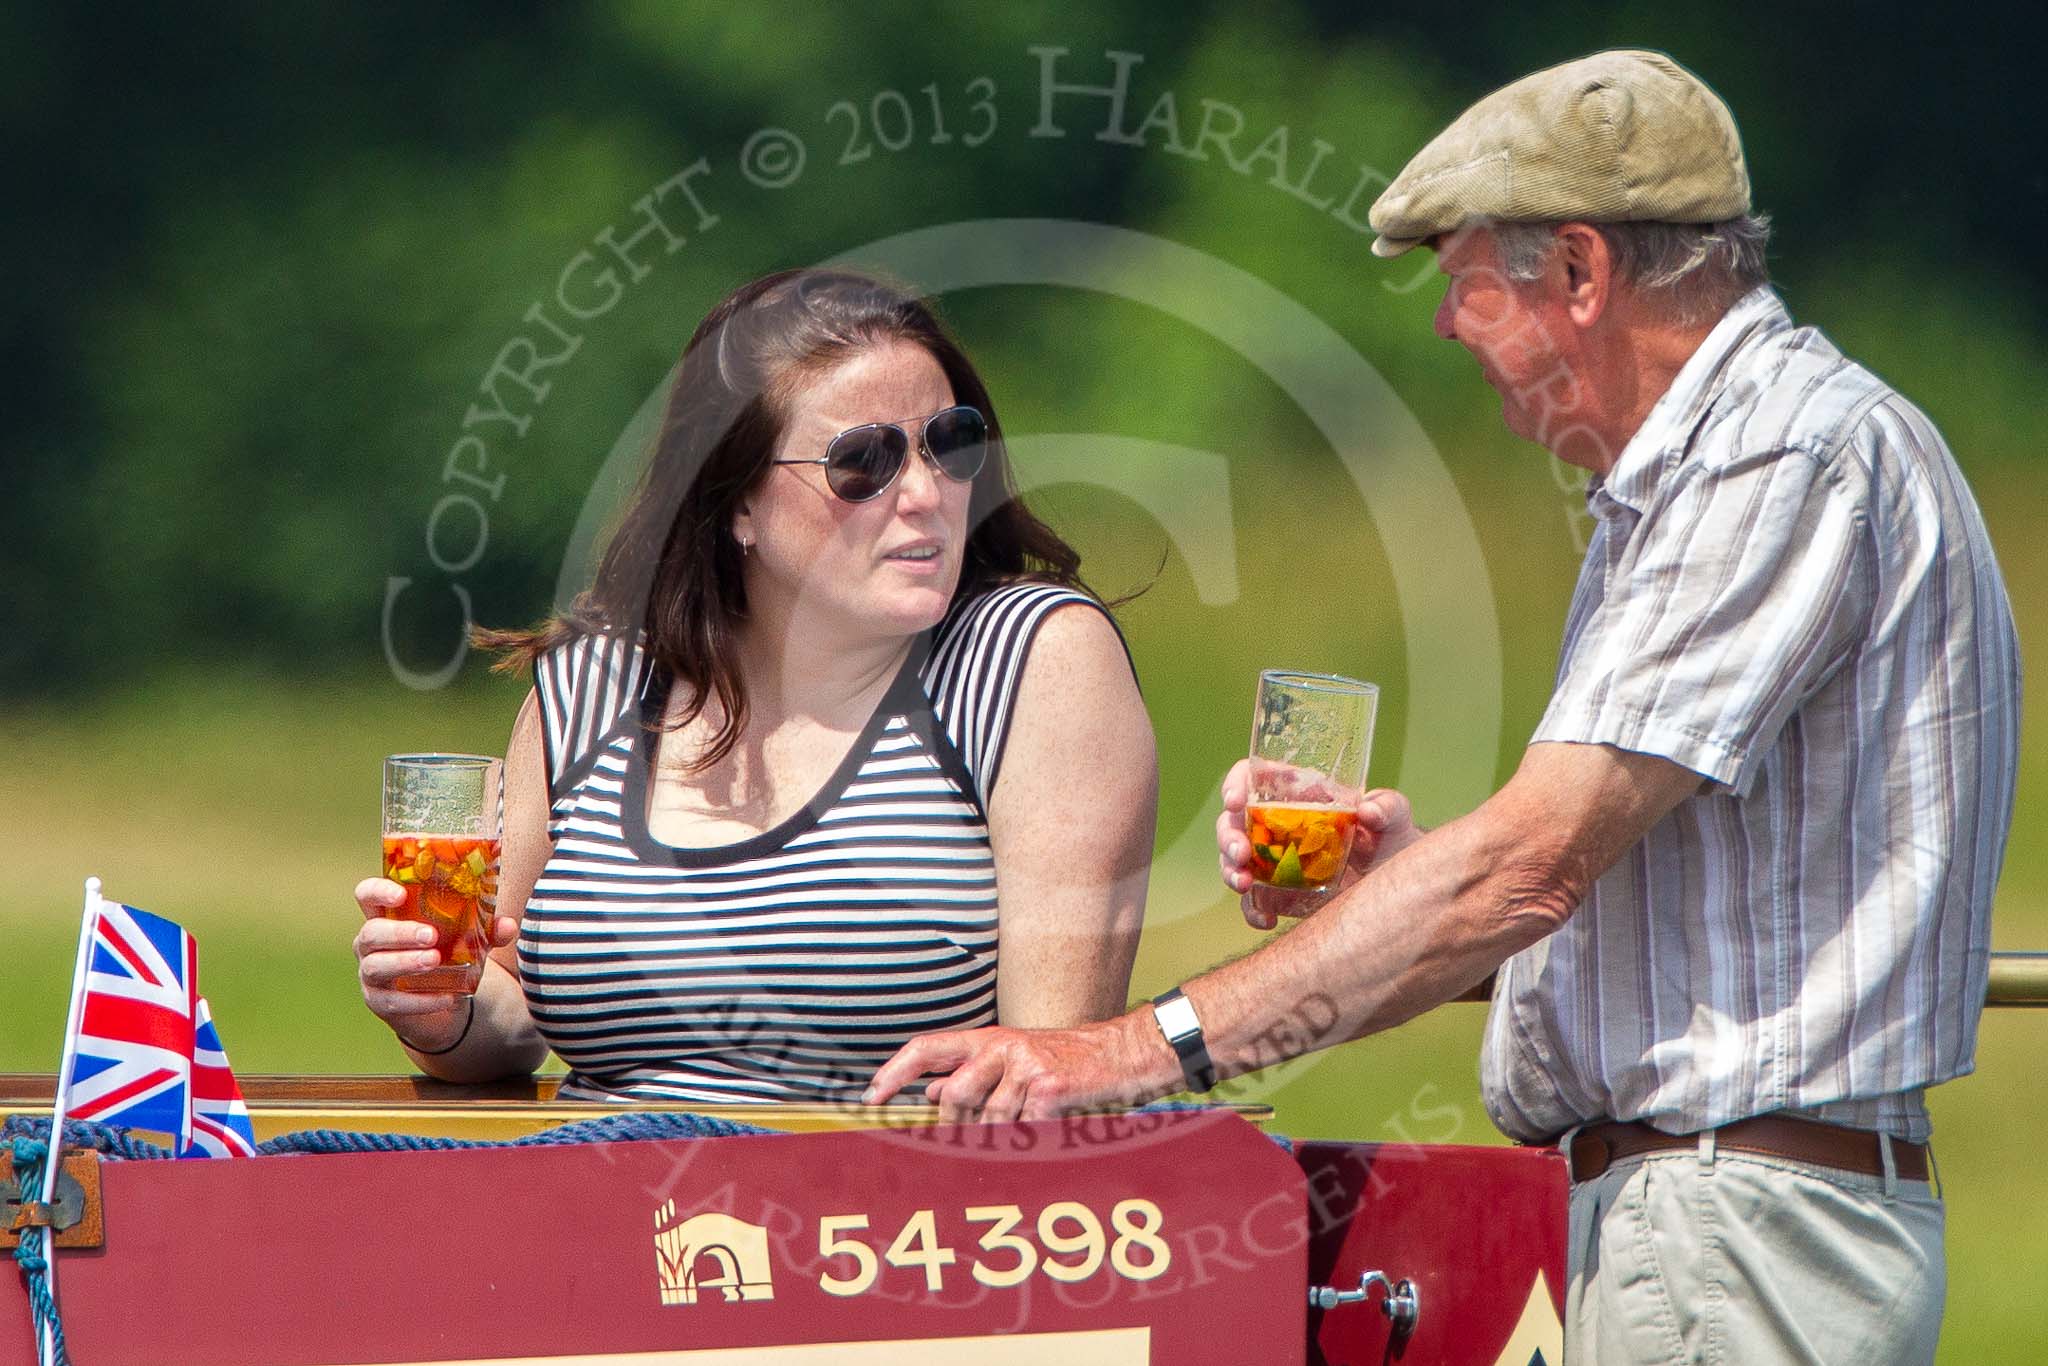 Henley Royal Regatta 2013, Saturday: Pimm's on board of the passing narrowboat Gee-Jay. Image #241, 06 July 2013 11:50 River Thames, Henley on Thames, UK